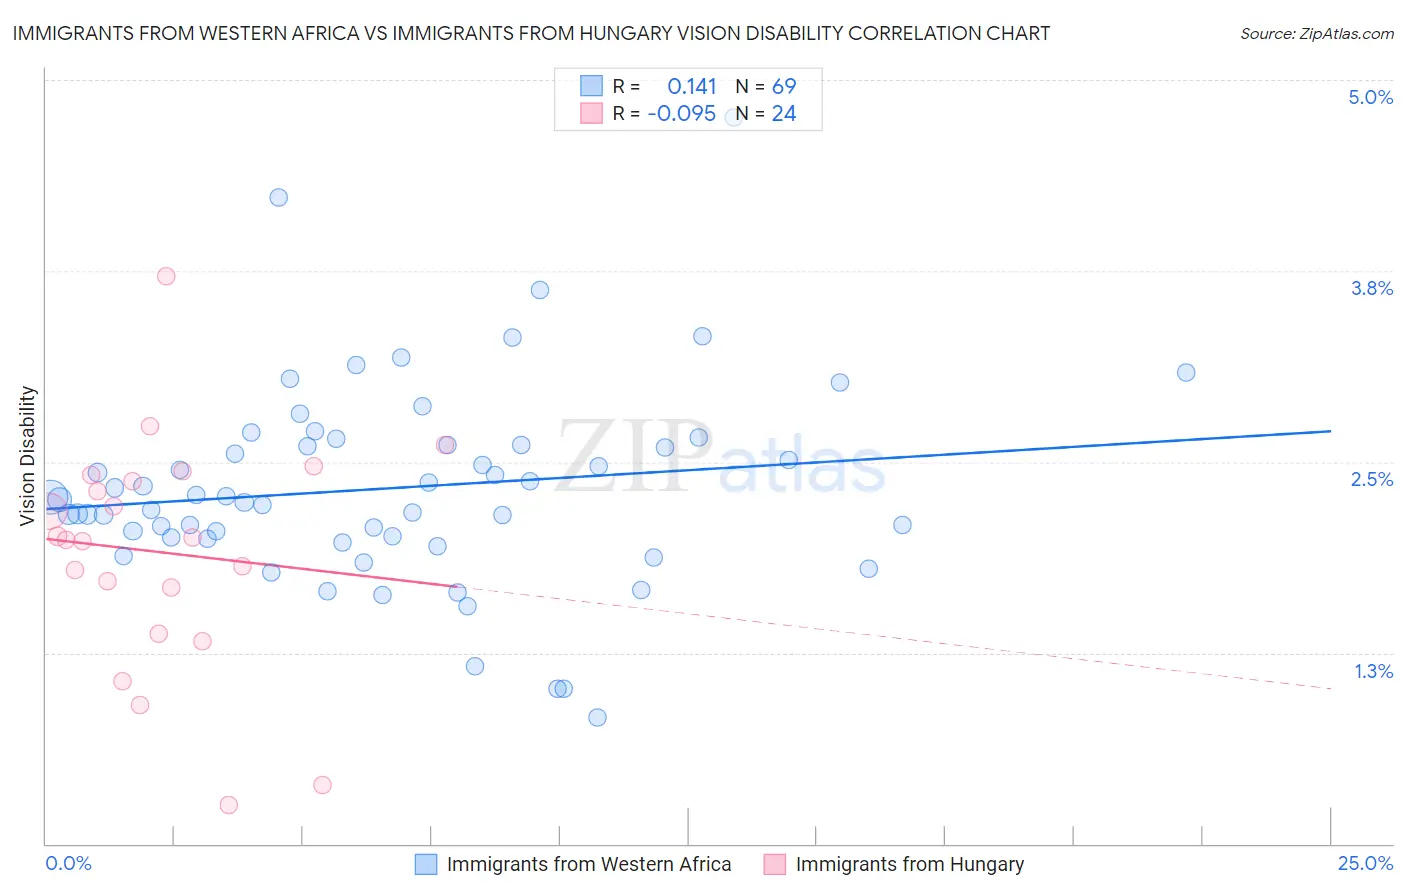 Immigrants from Western Africa vs Immigrants from Hungary Vision Disability